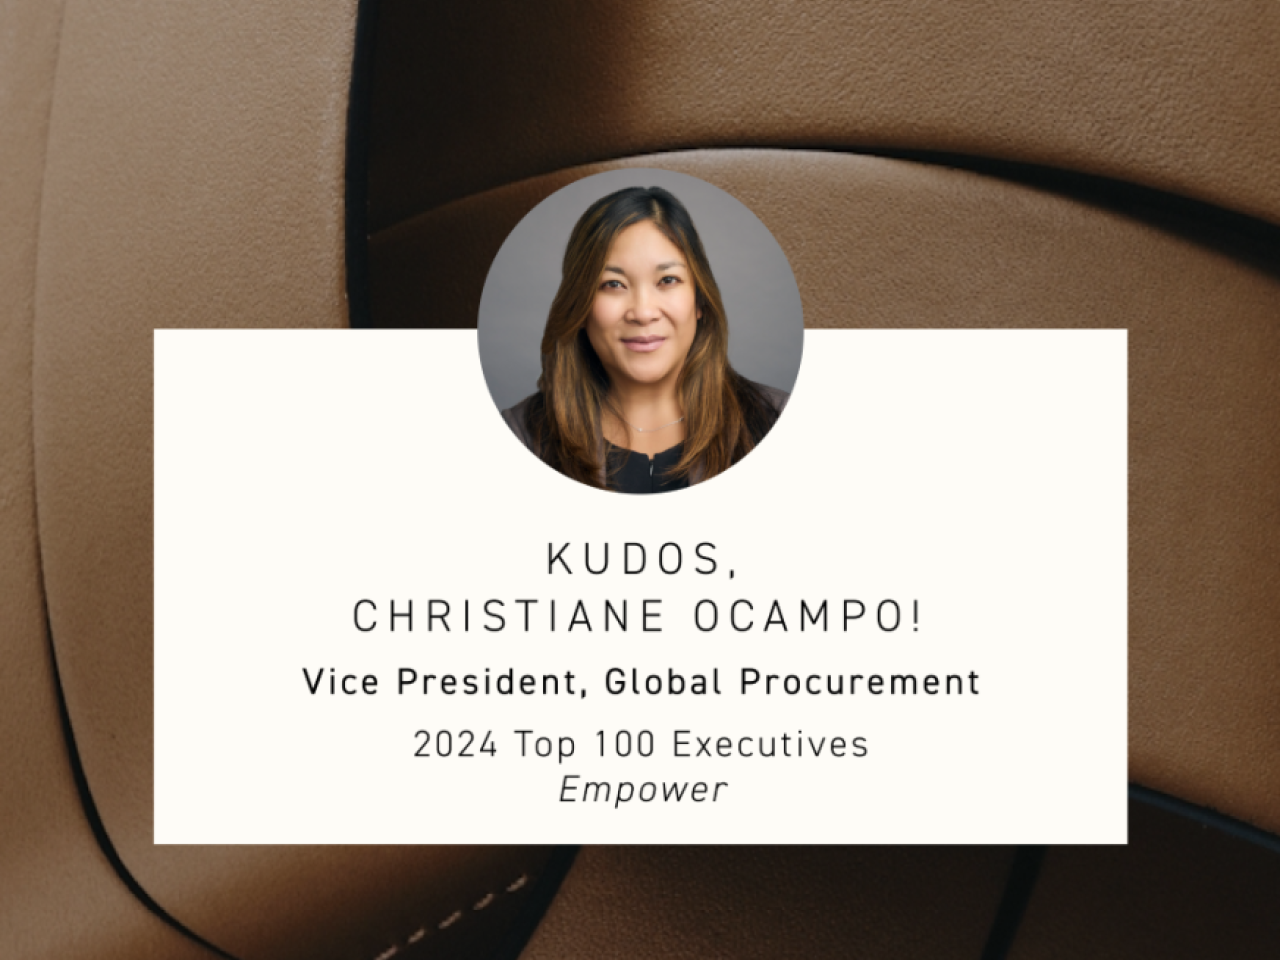 A photo of Christiane Ocampo, Vice President of Global Procurement at Tapestry, who was named among the 2024 ‘Top 100 Executives’ by Empower, on a background of brown stitched leather